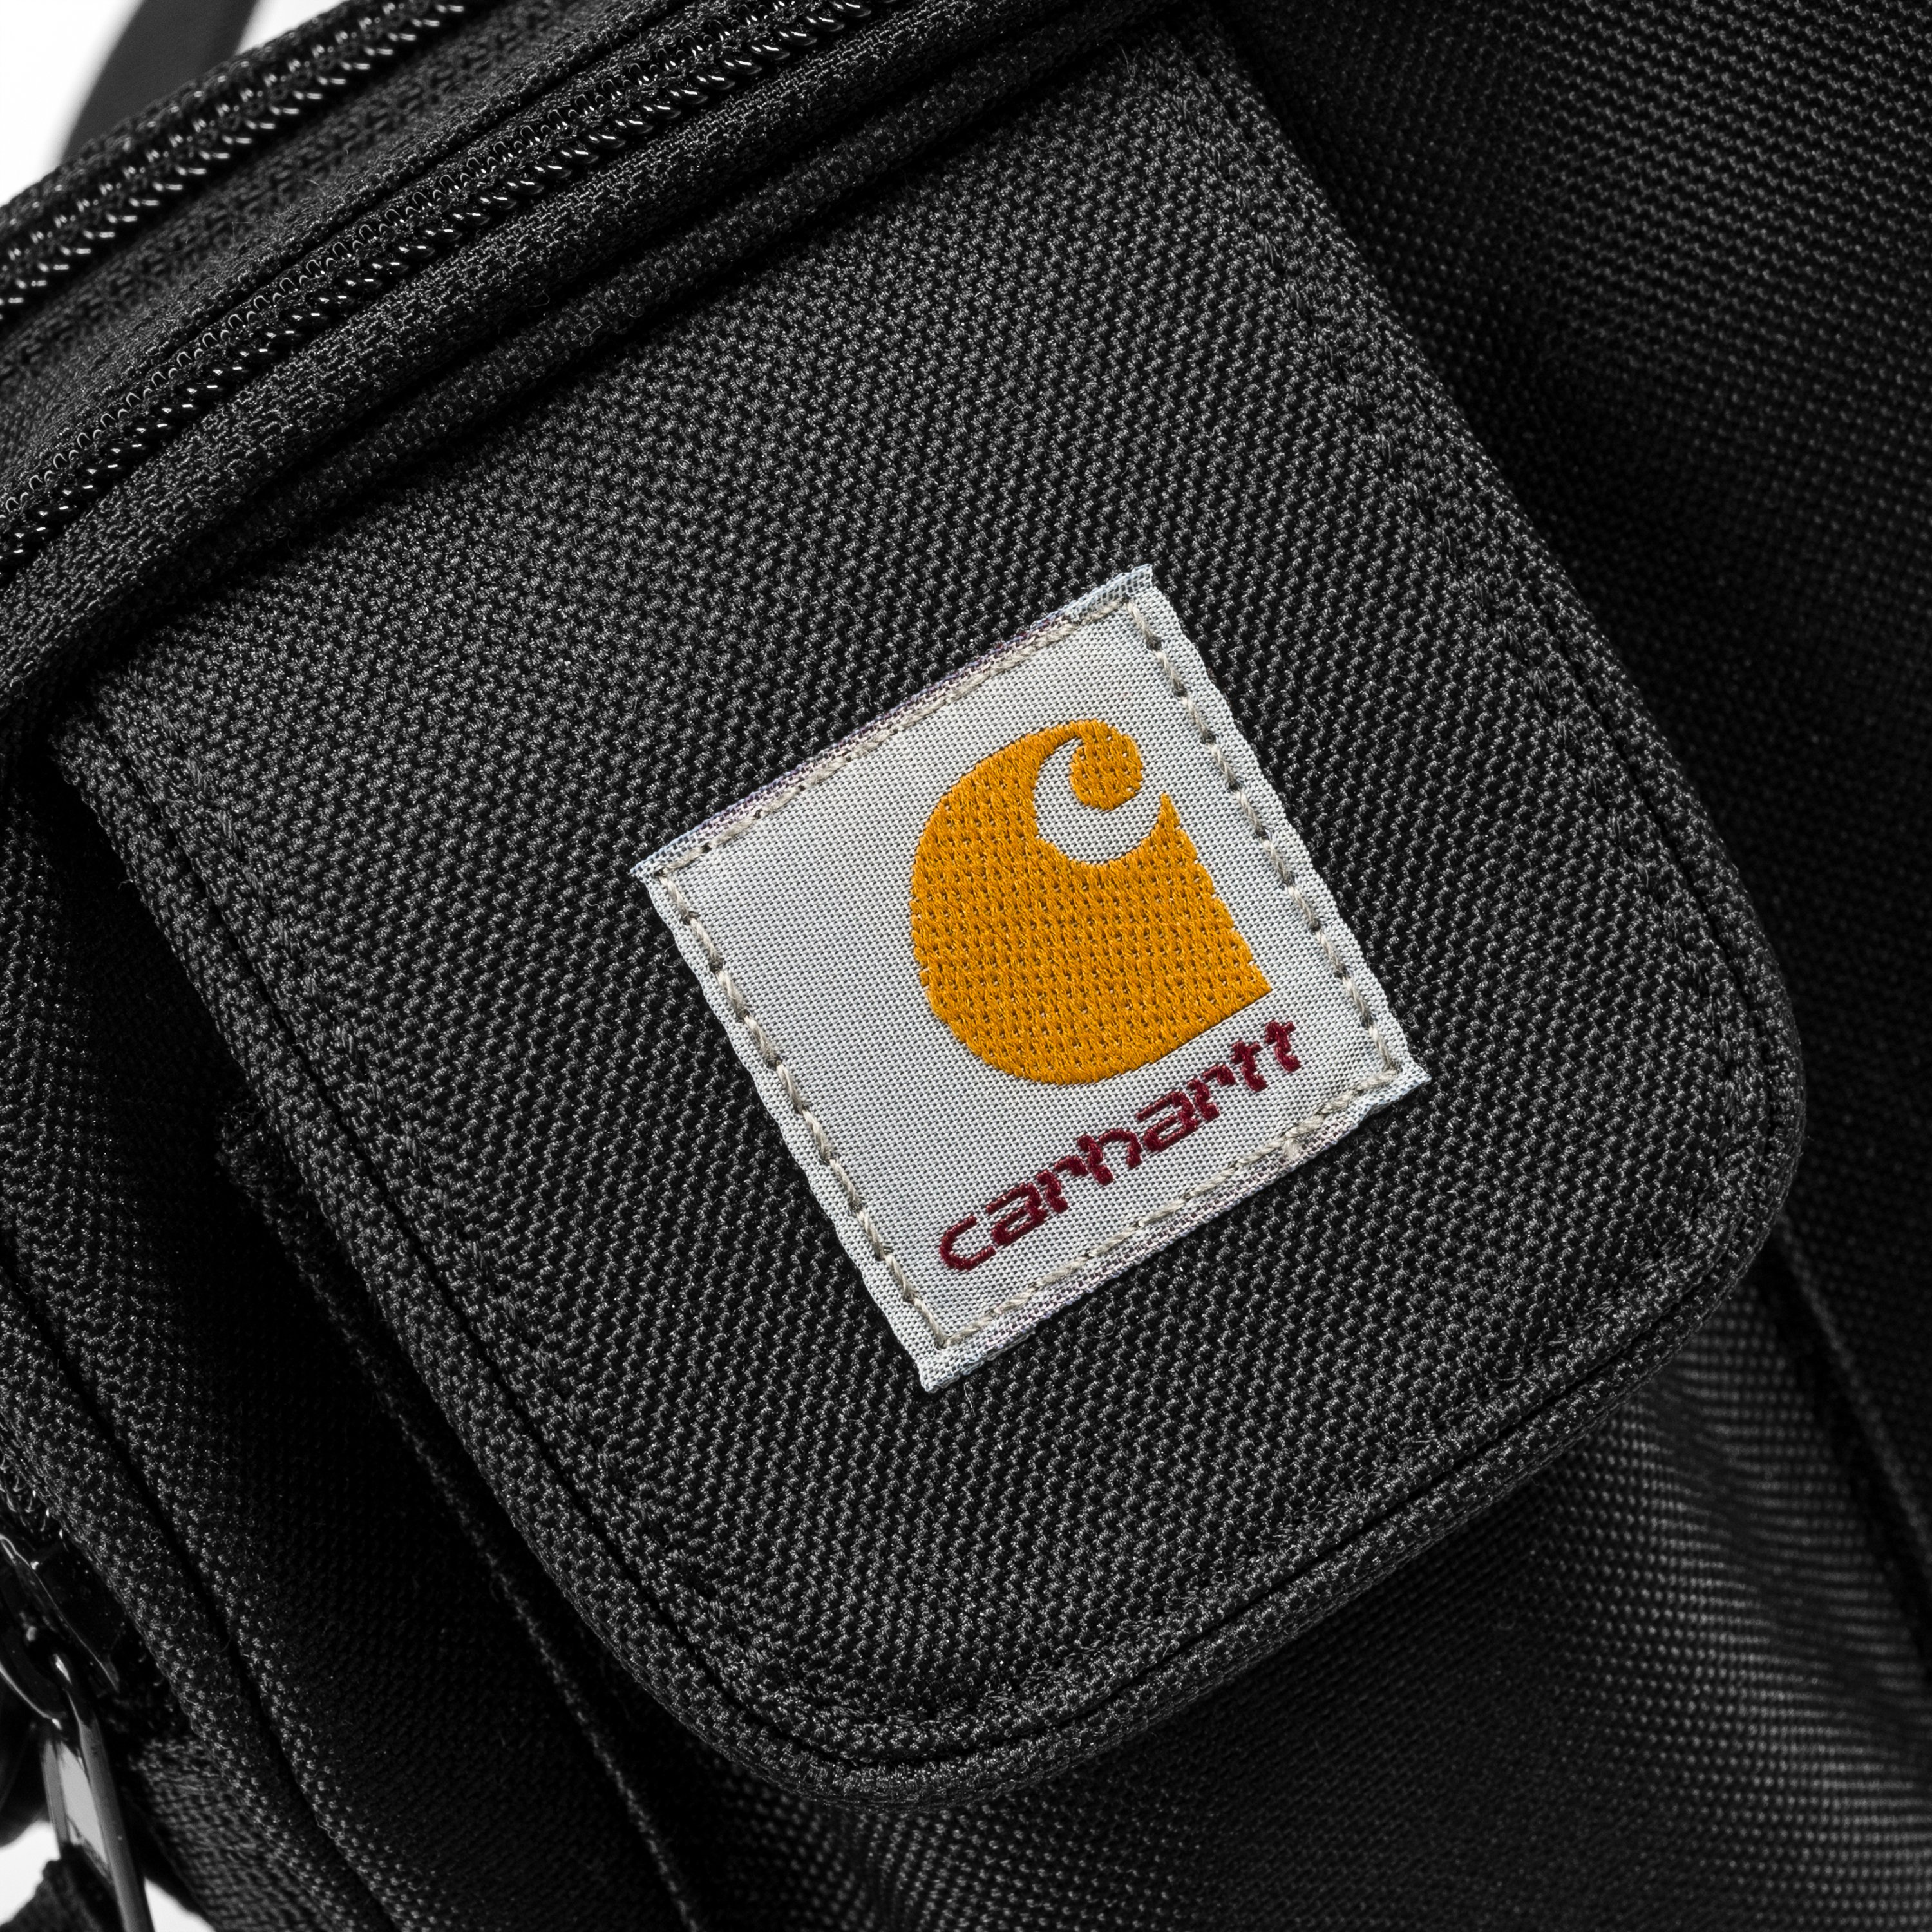 Shop Carhartt WIP Essentials Small Recycled Bag (storm blue) online